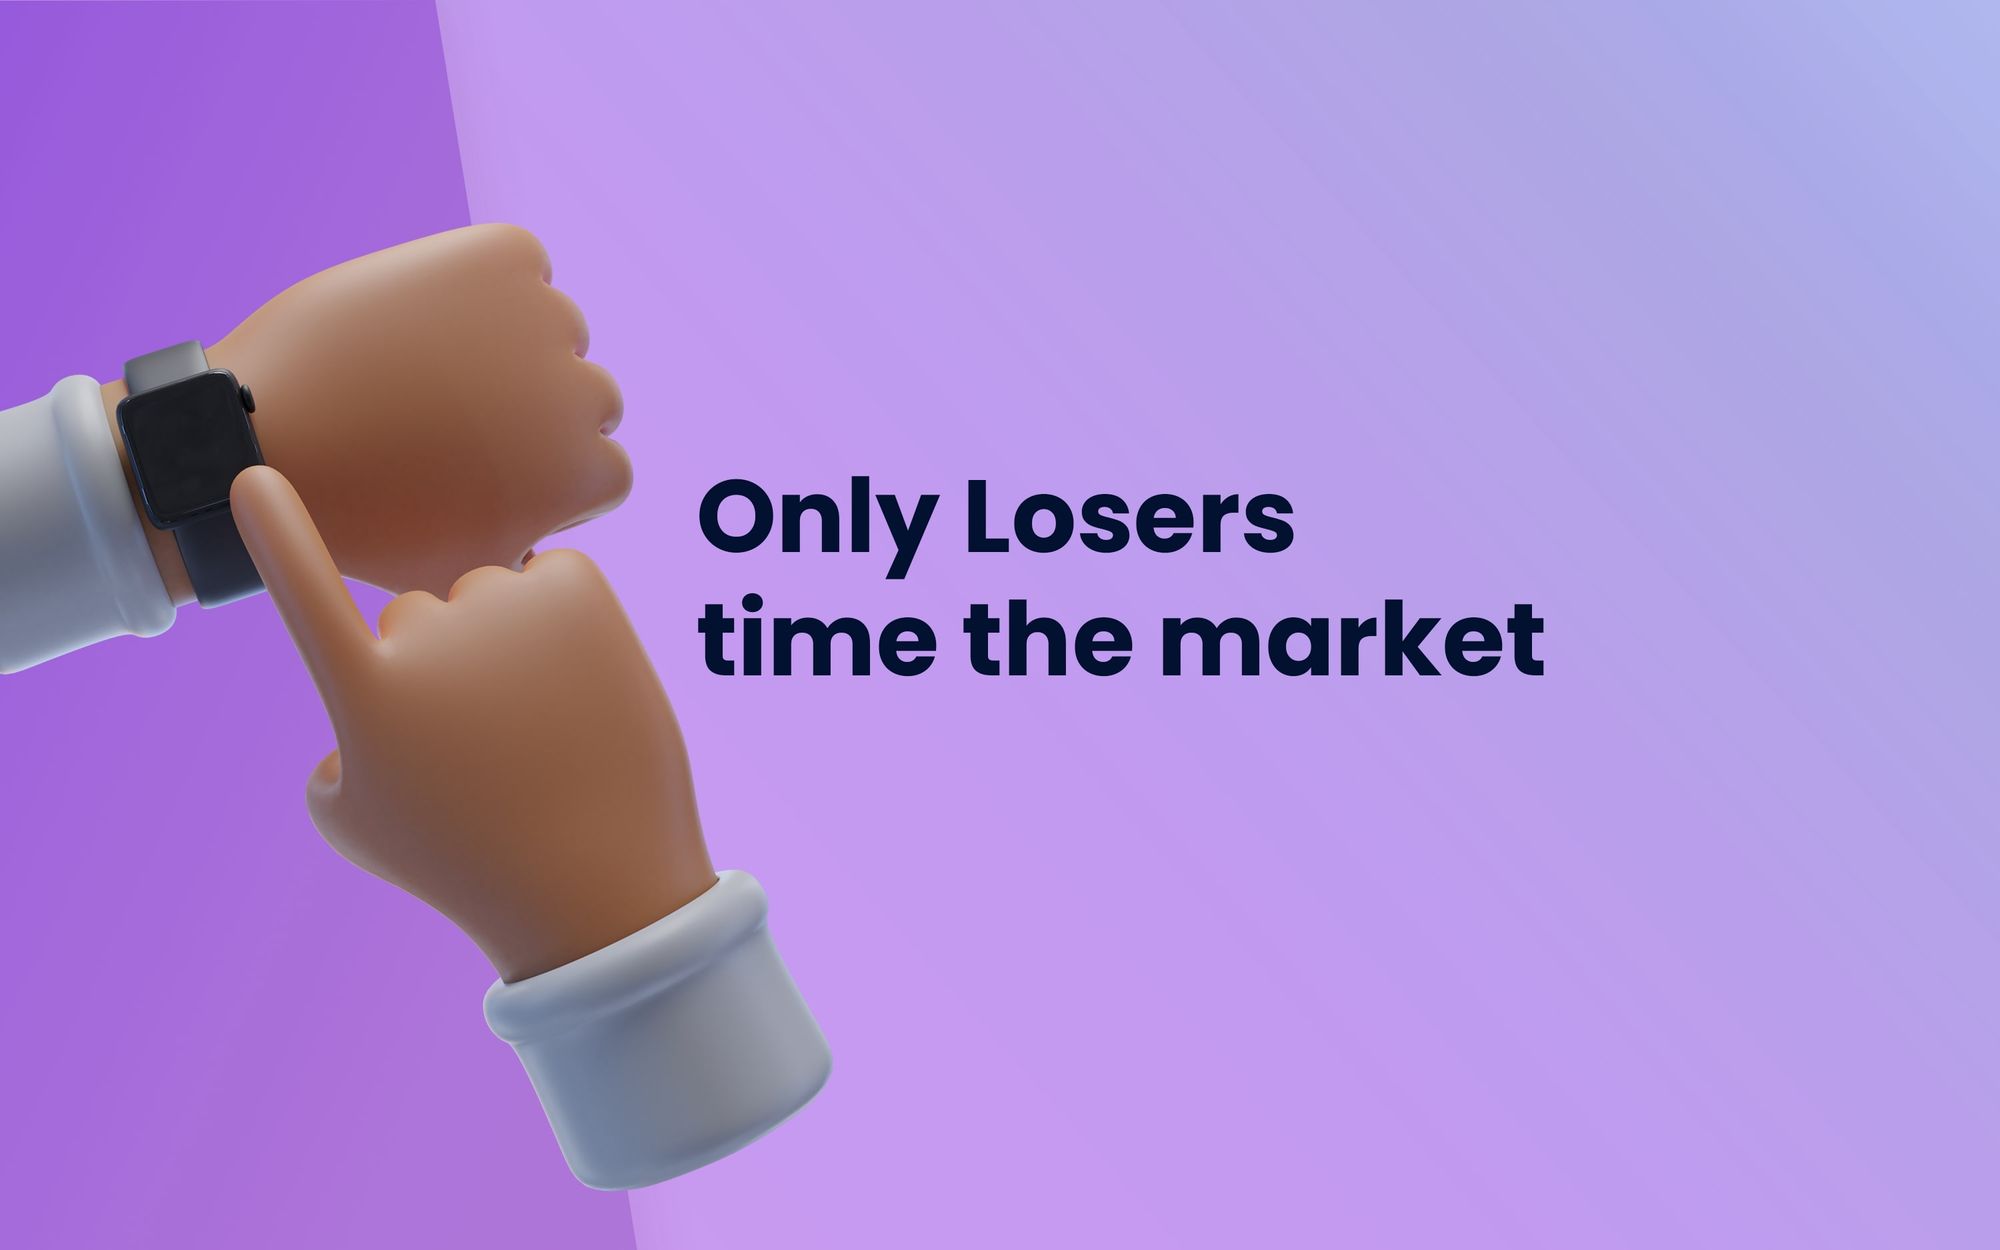 Only losers time the market